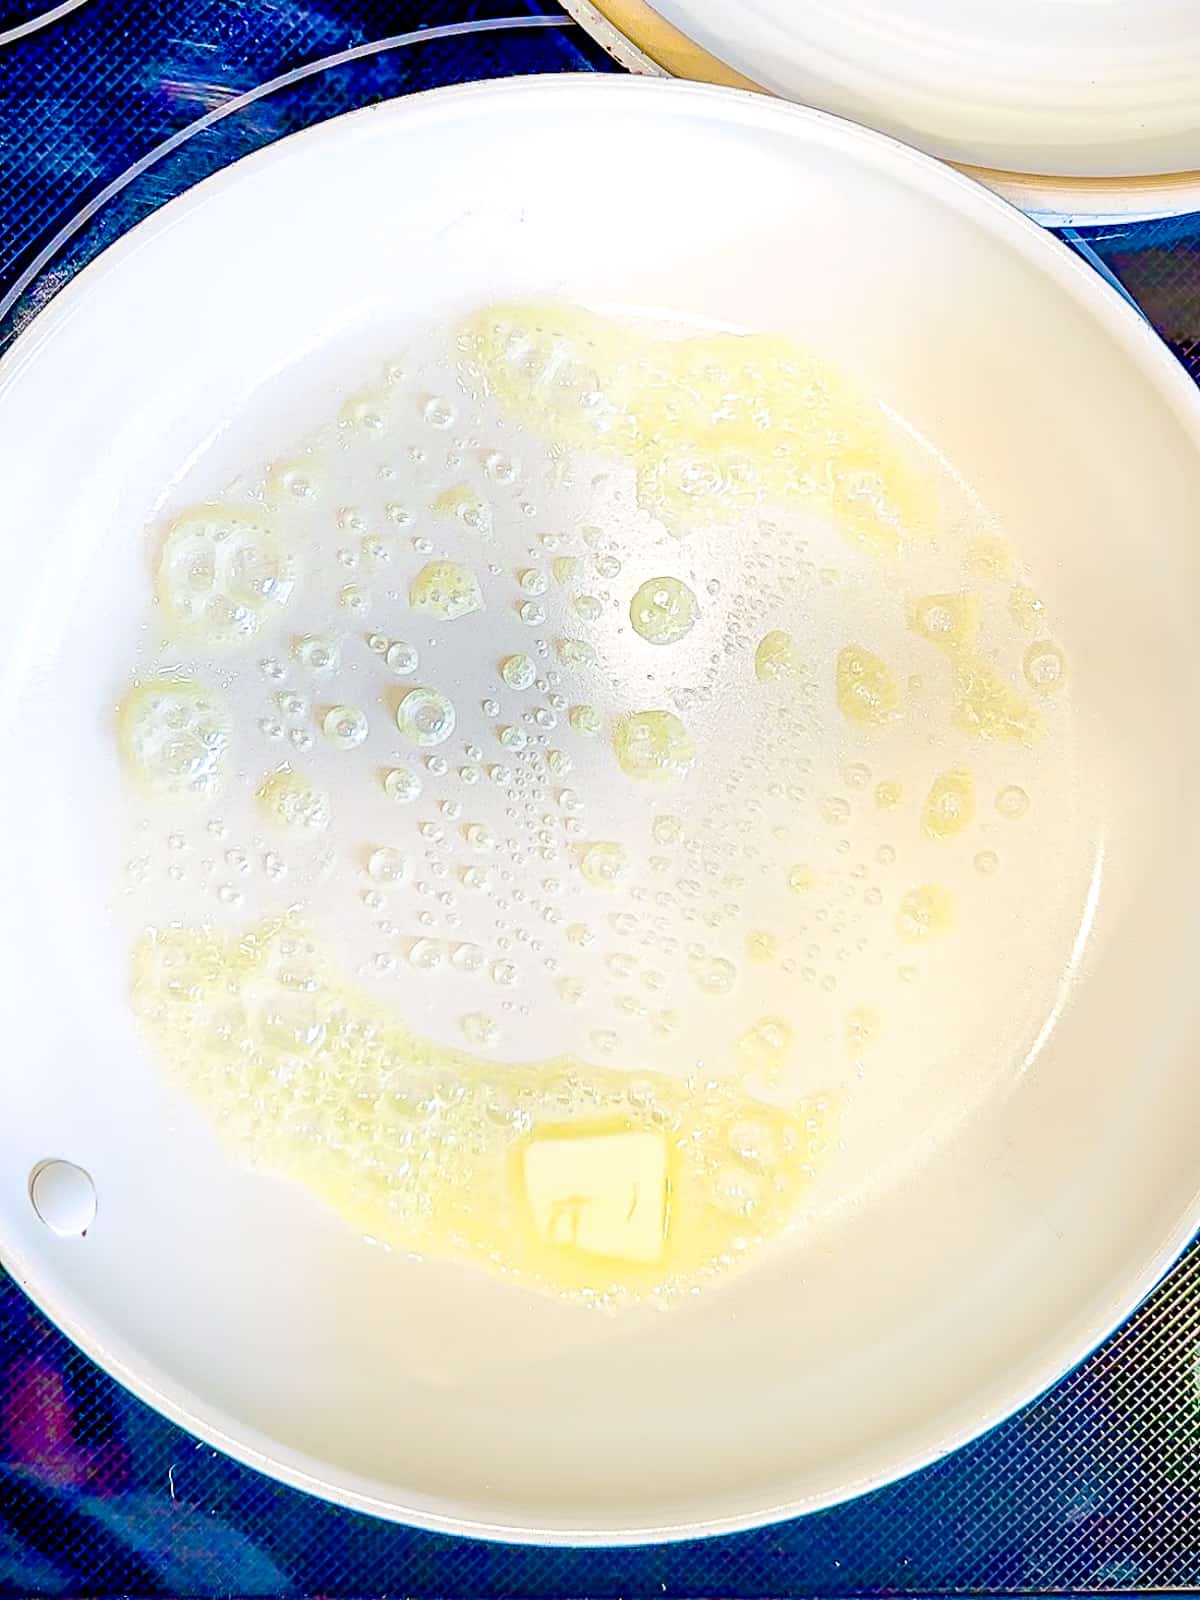 Melting butter in a nonstick pan to make scrambled eggs.